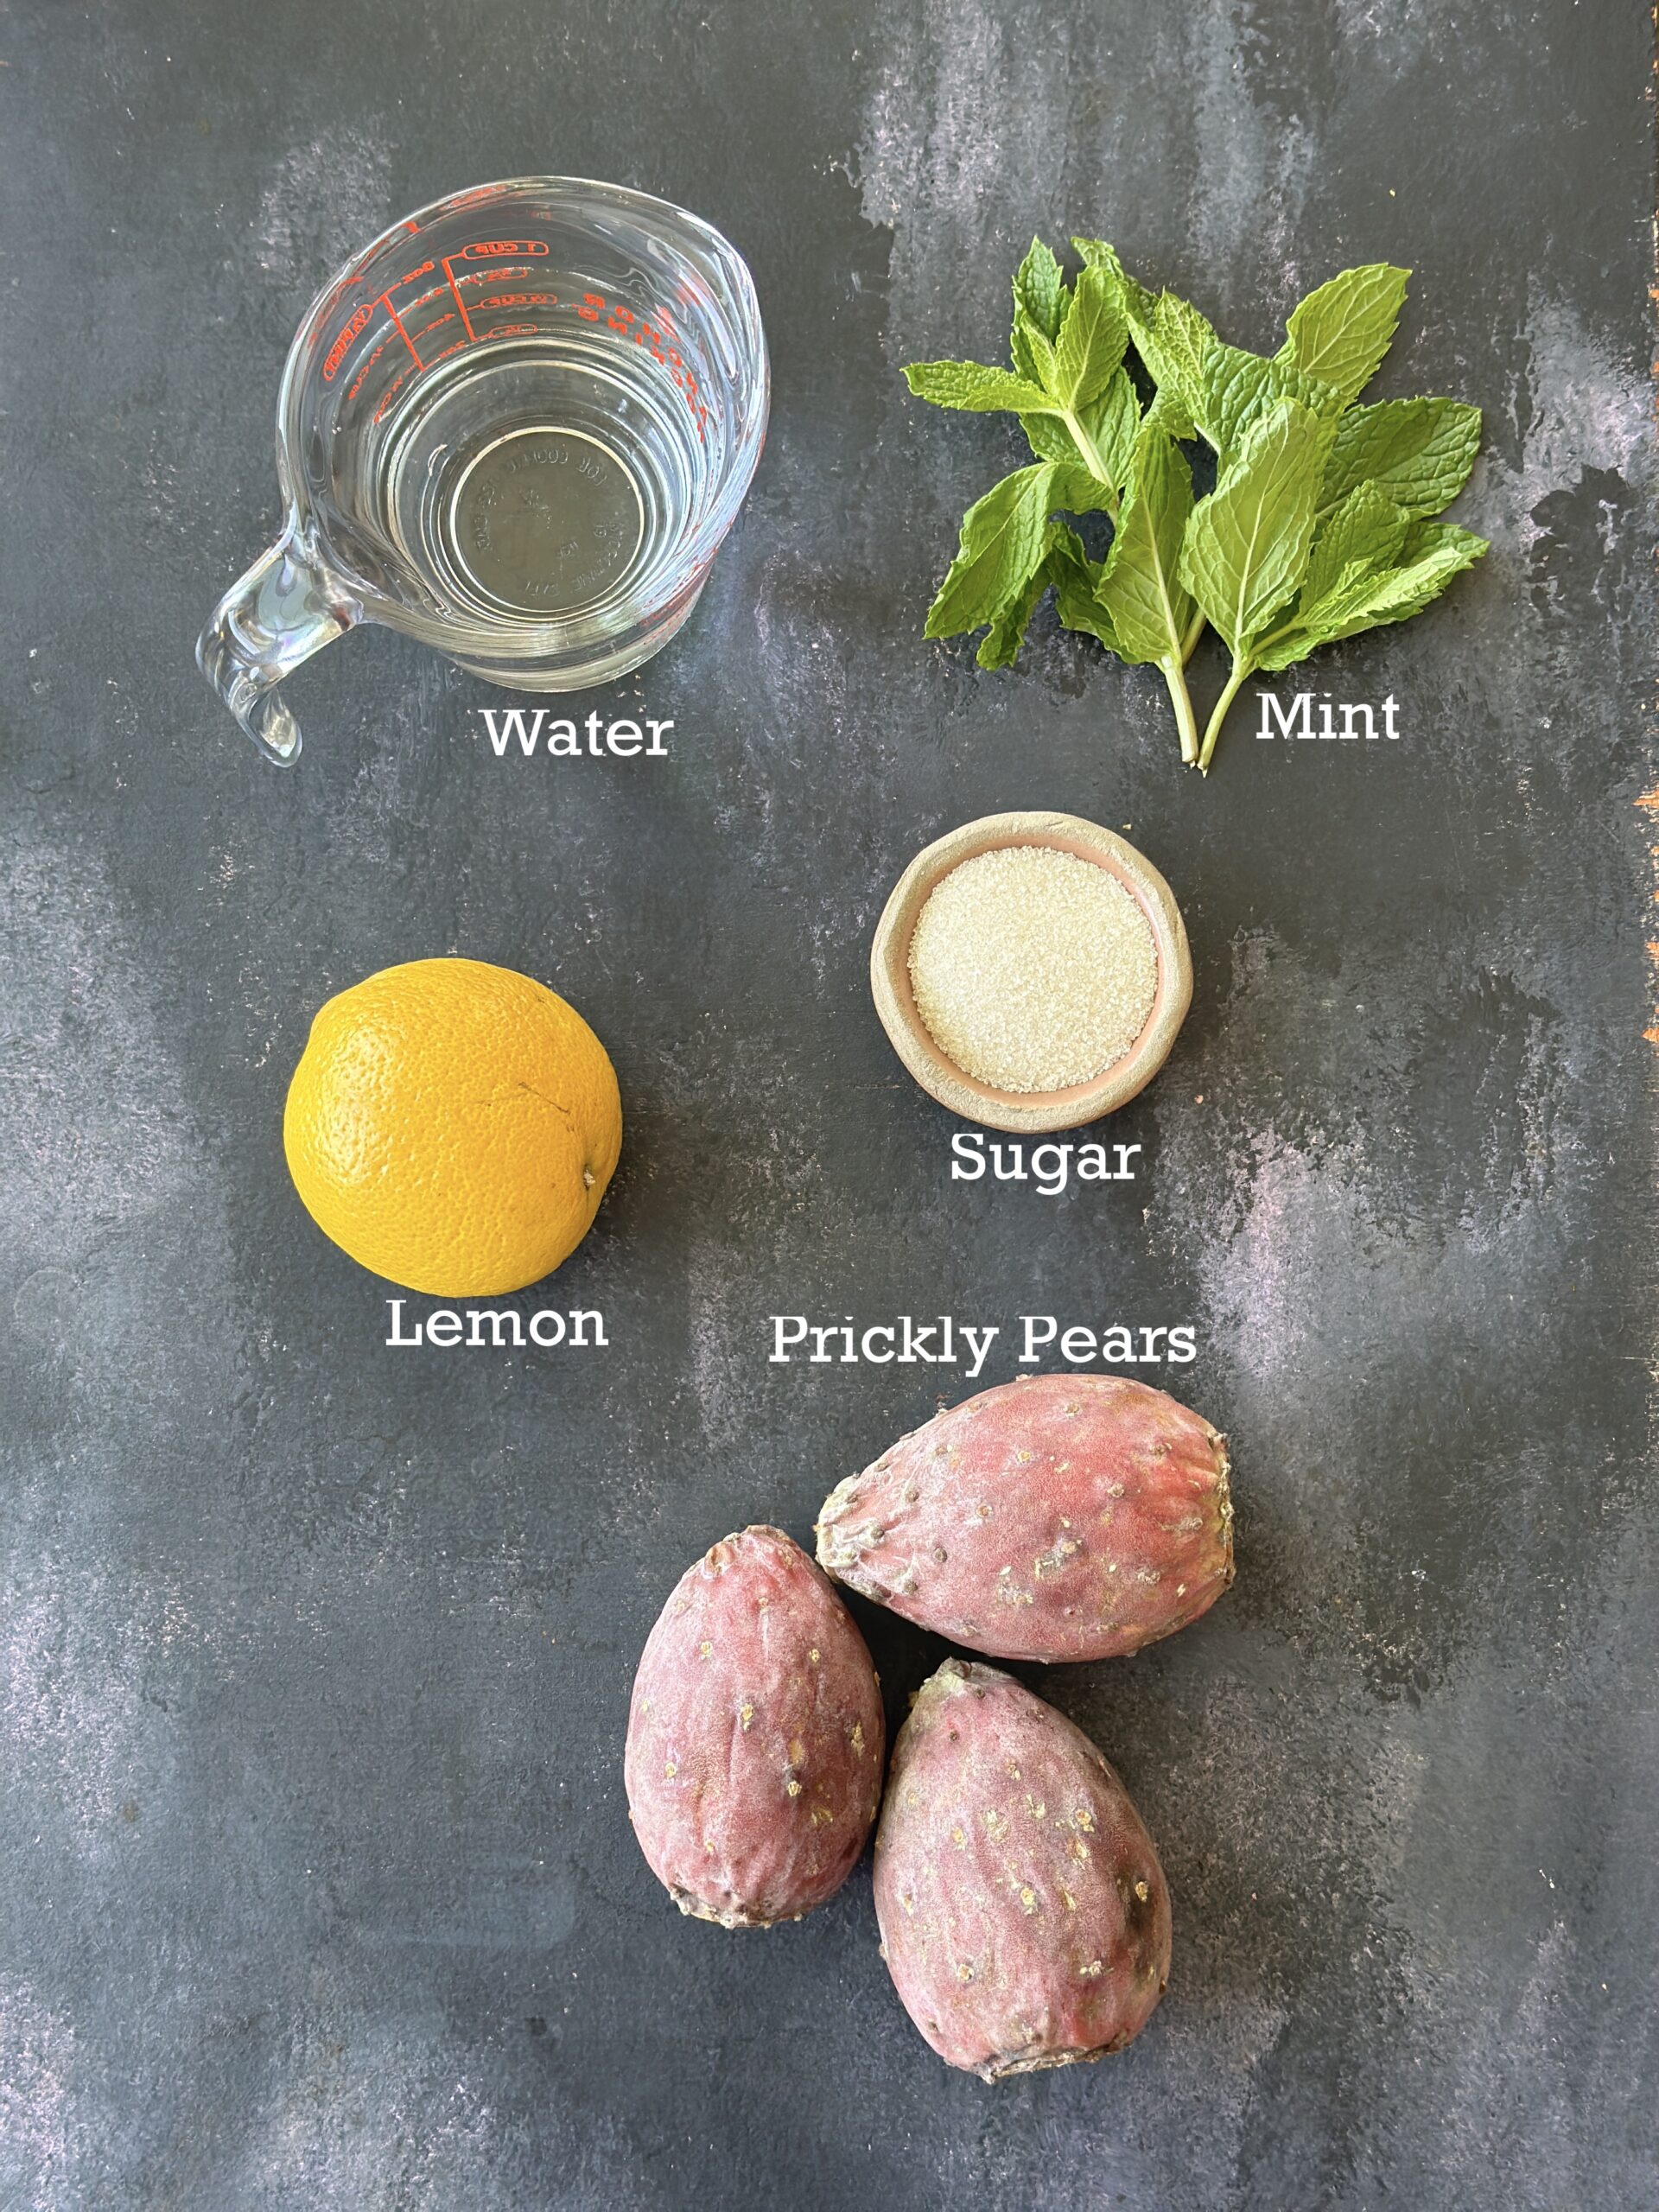 Ingredients for making Prickly pear Lemonade; pears, lemon, sugar, water and mint leaves on a black background.